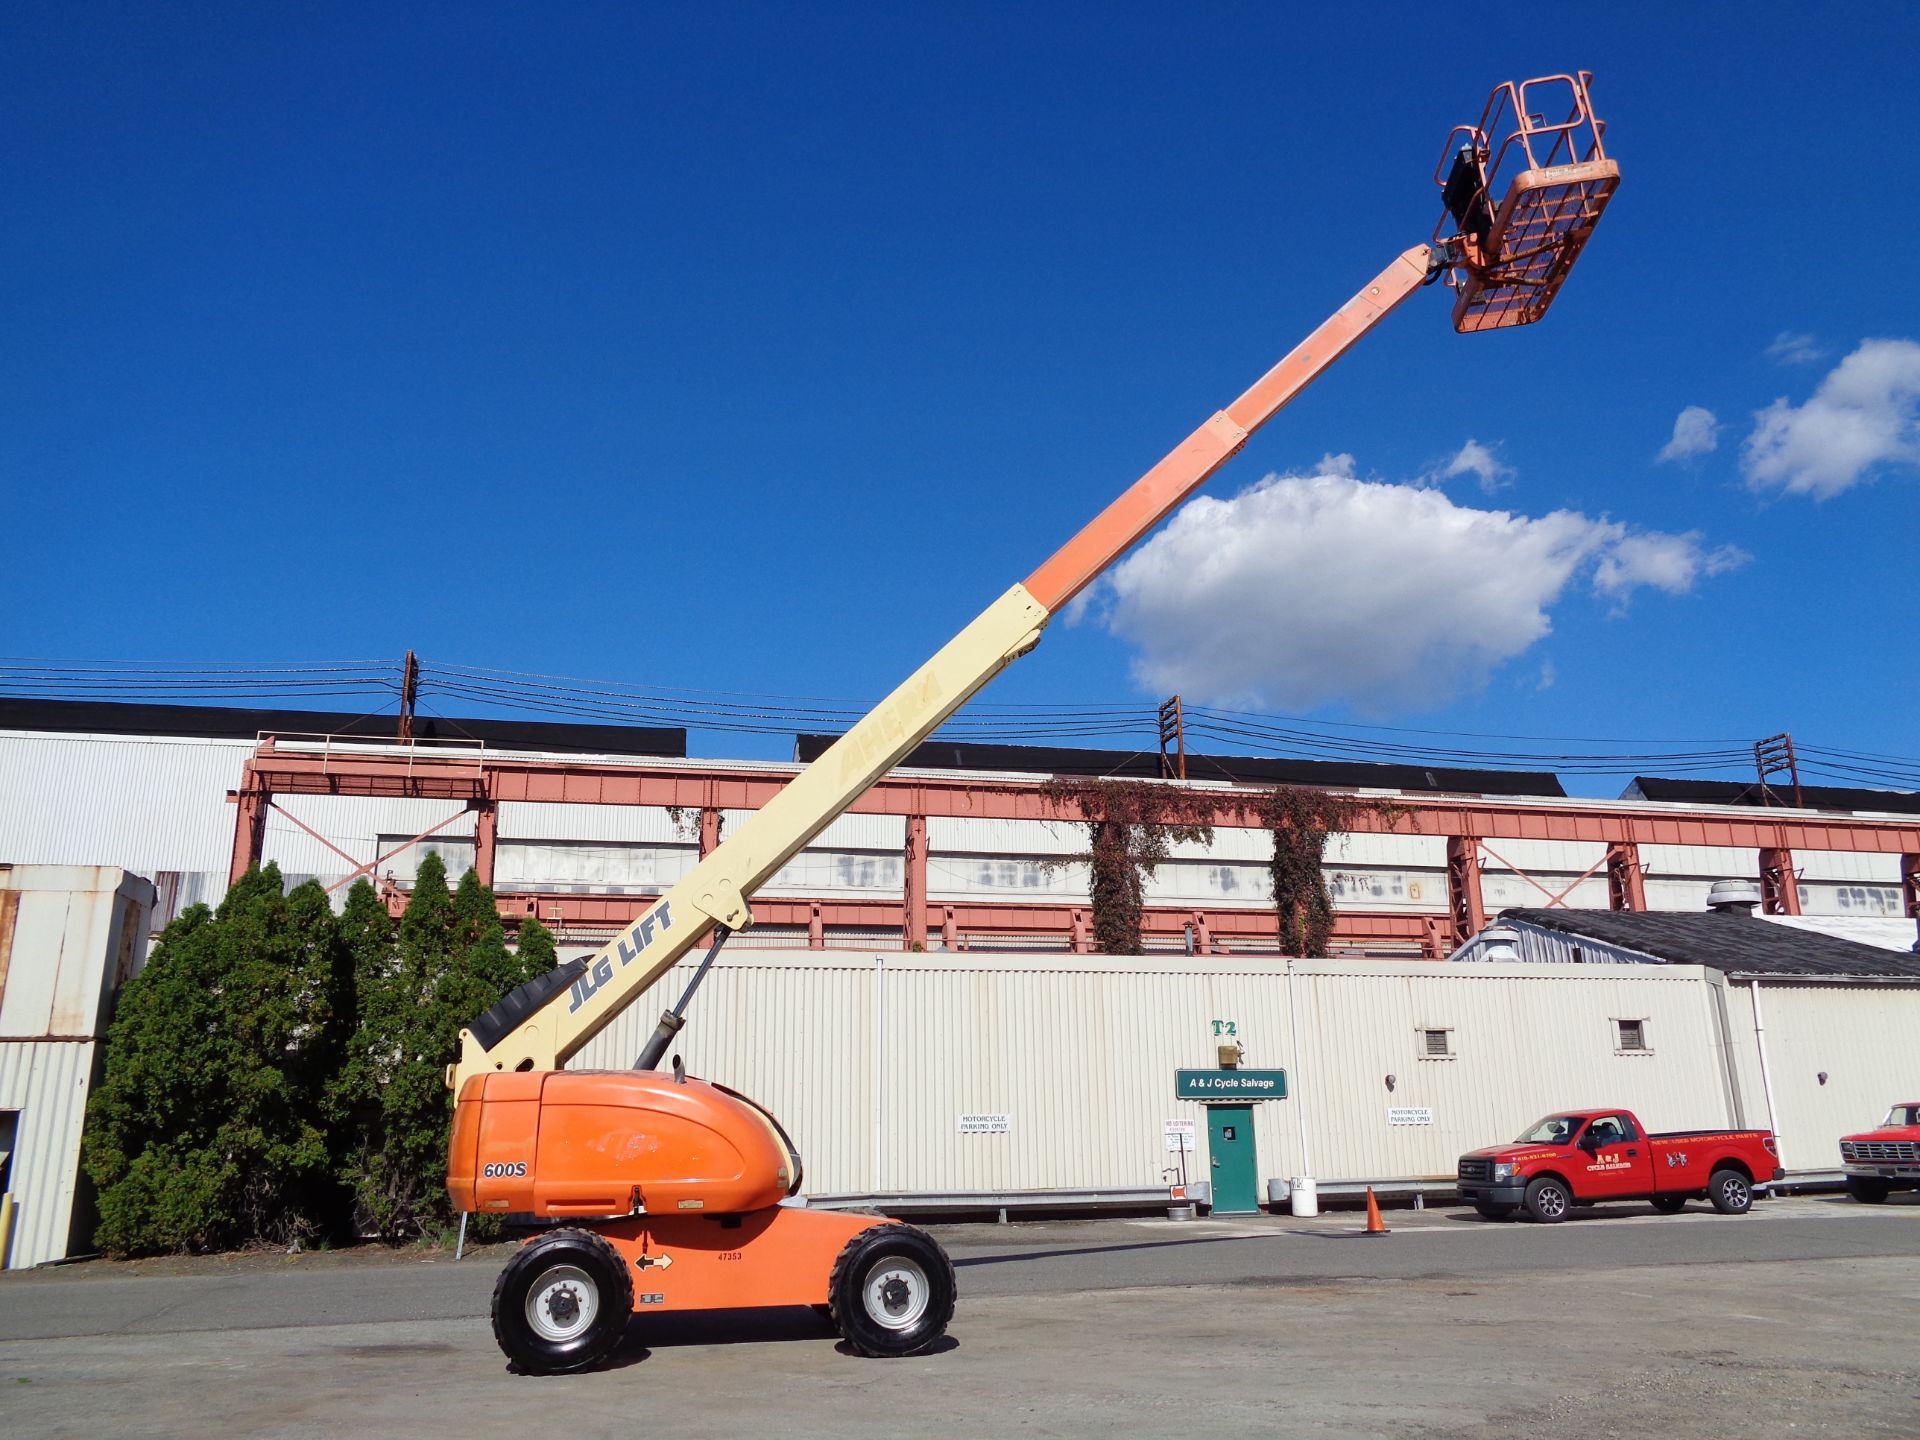 JLG 600S Boom Lift - 4x4 - 60ft Height - Image 6 of 19